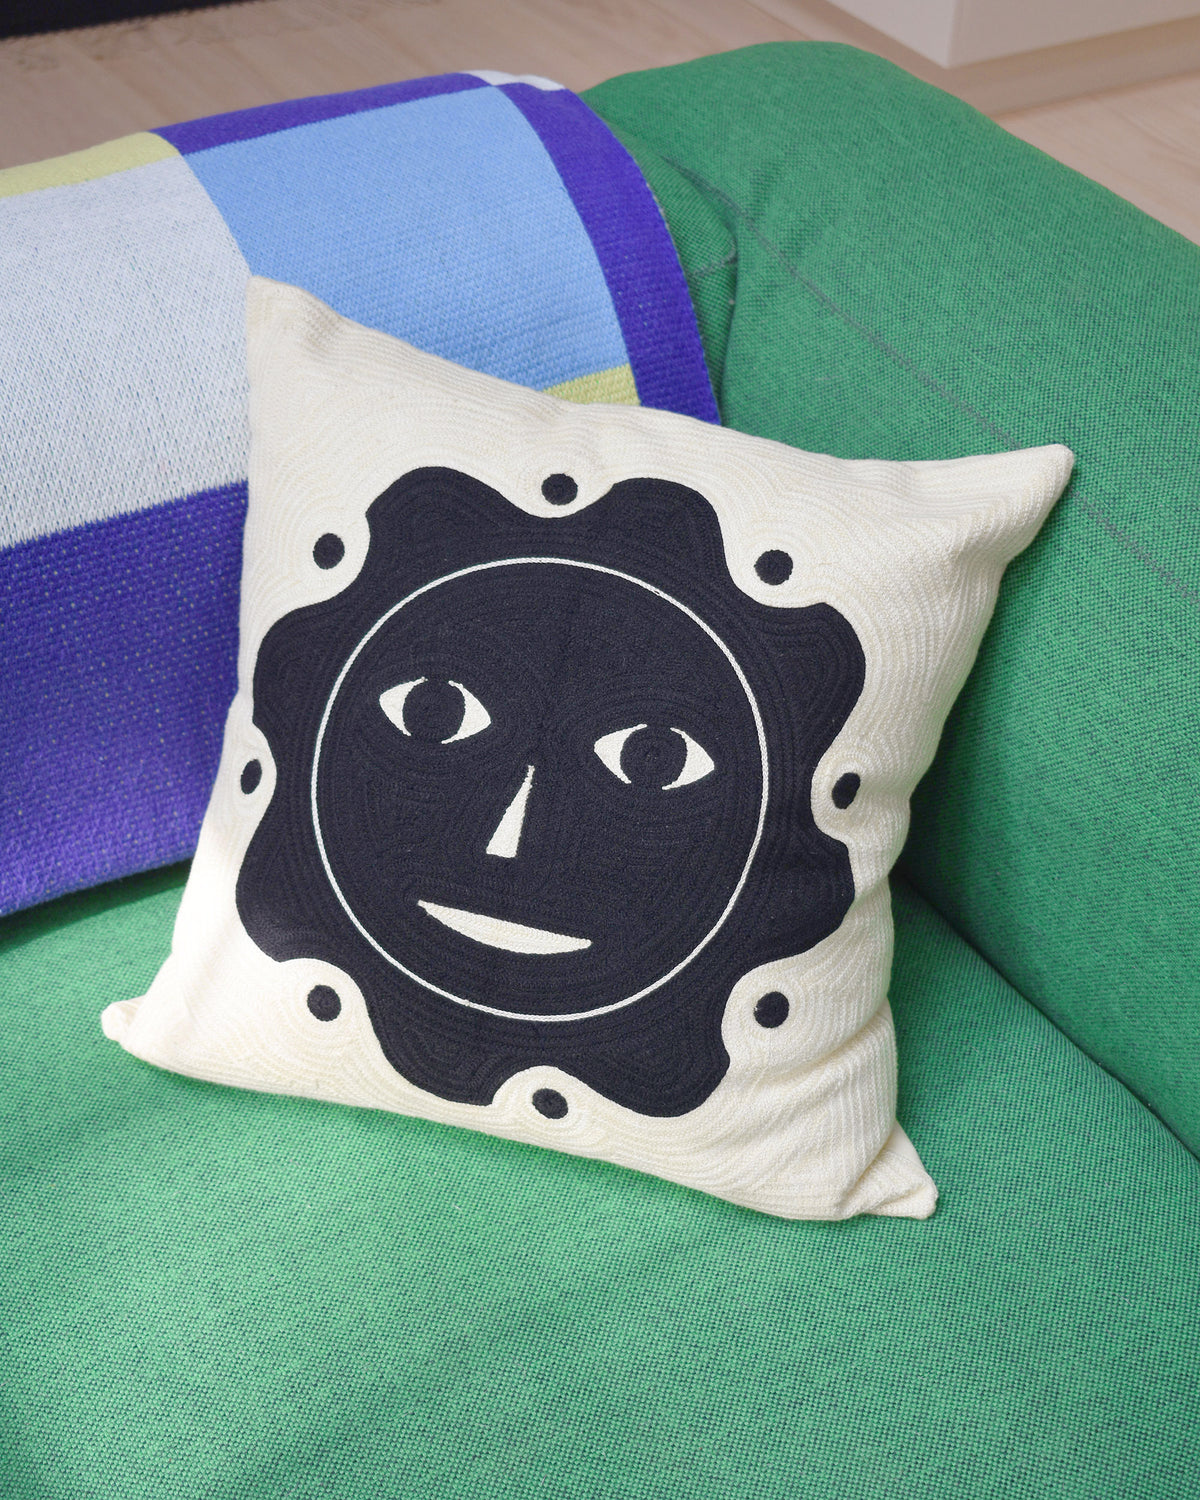 Dusen Dusen Everybody Sun Pillow. Embroidered pillow with Everybody Sun Face. 100% cotton, back zip, non-embroidered natural canvas back. Available as 18" x 18". Spot clean only. Made in India. Pillow insert is a polyfill-down alternative and mimics the fluffiness of natural down. Insert is made in the USA.